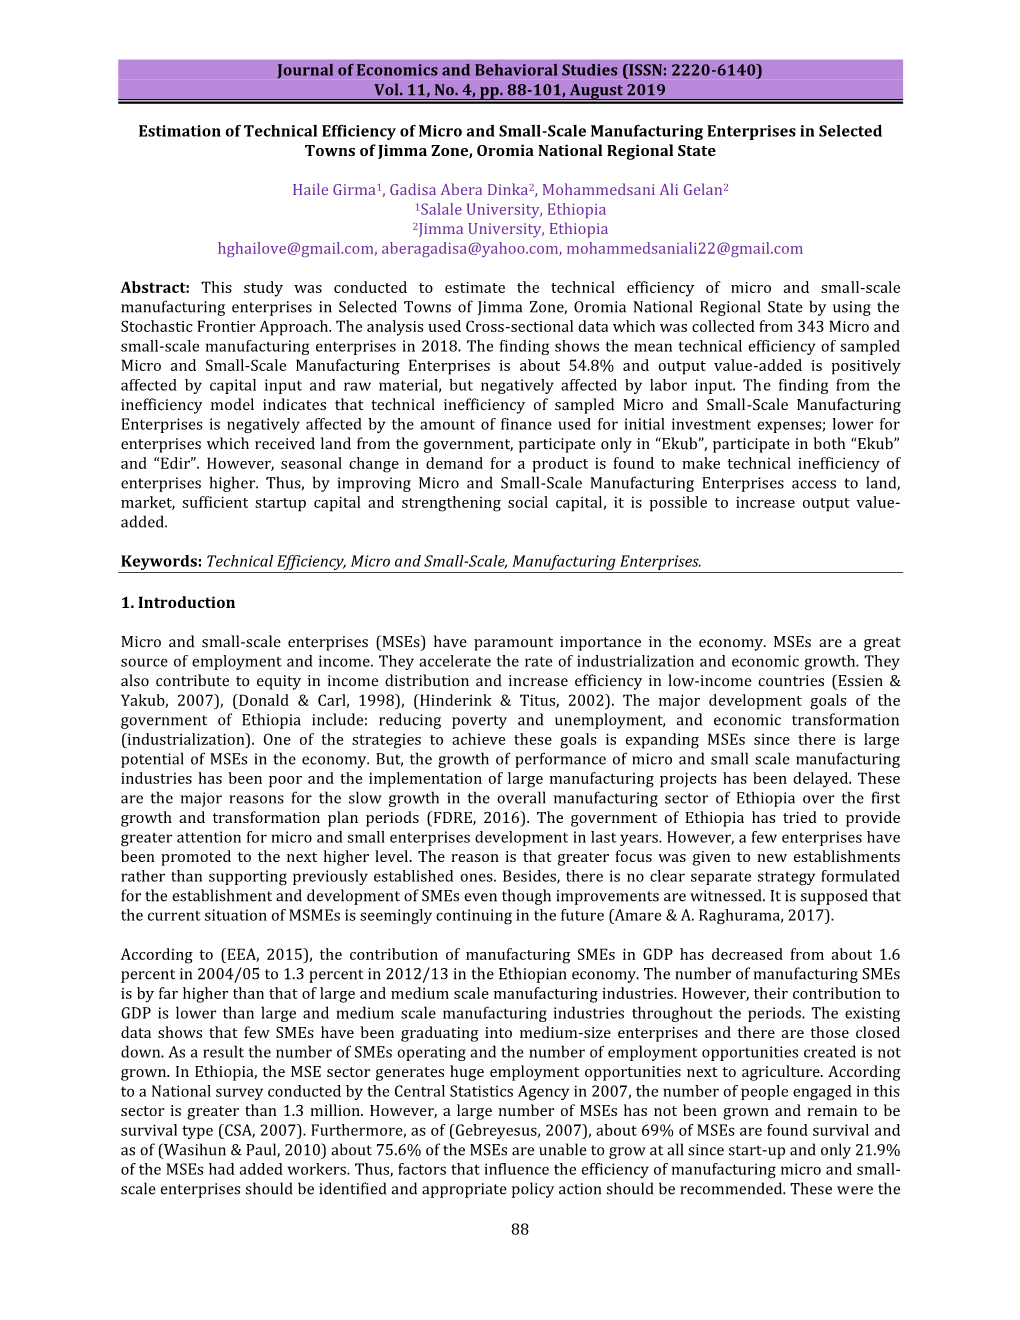 Estimation of Technical Efficiency of Micro and Small-Scale Manufacturing Enterprises in Selected Towns of Jimma Zone, Oromia National Regional State